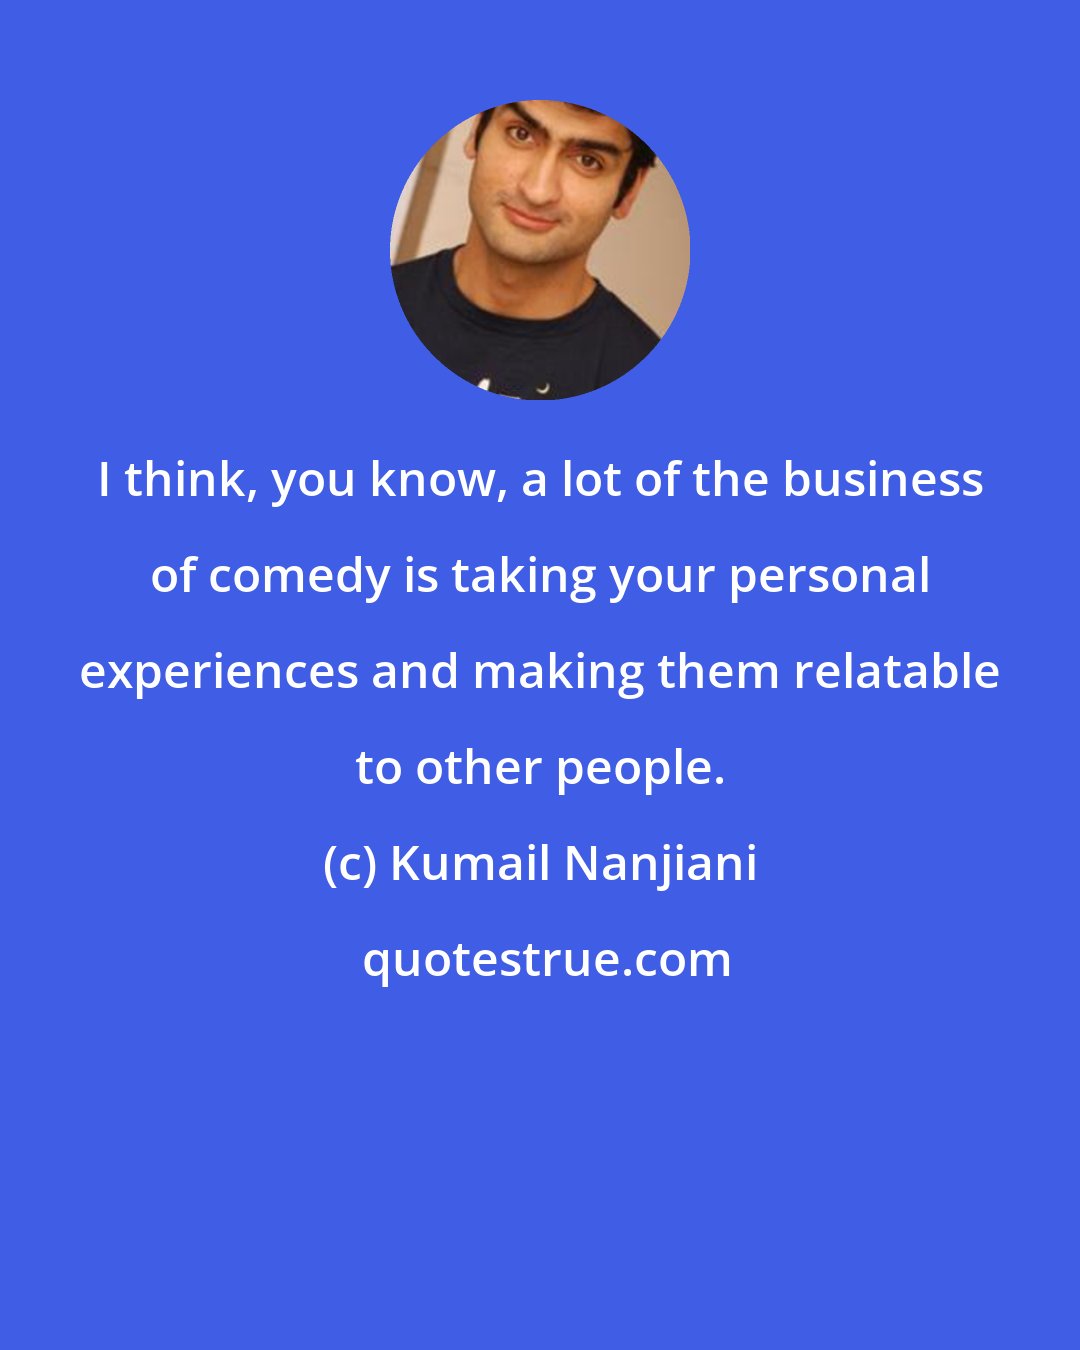 Kumail Nanjiani: I think, you know, a lot of the business of comedy is taking your personal experiences and making them relatable to other people.